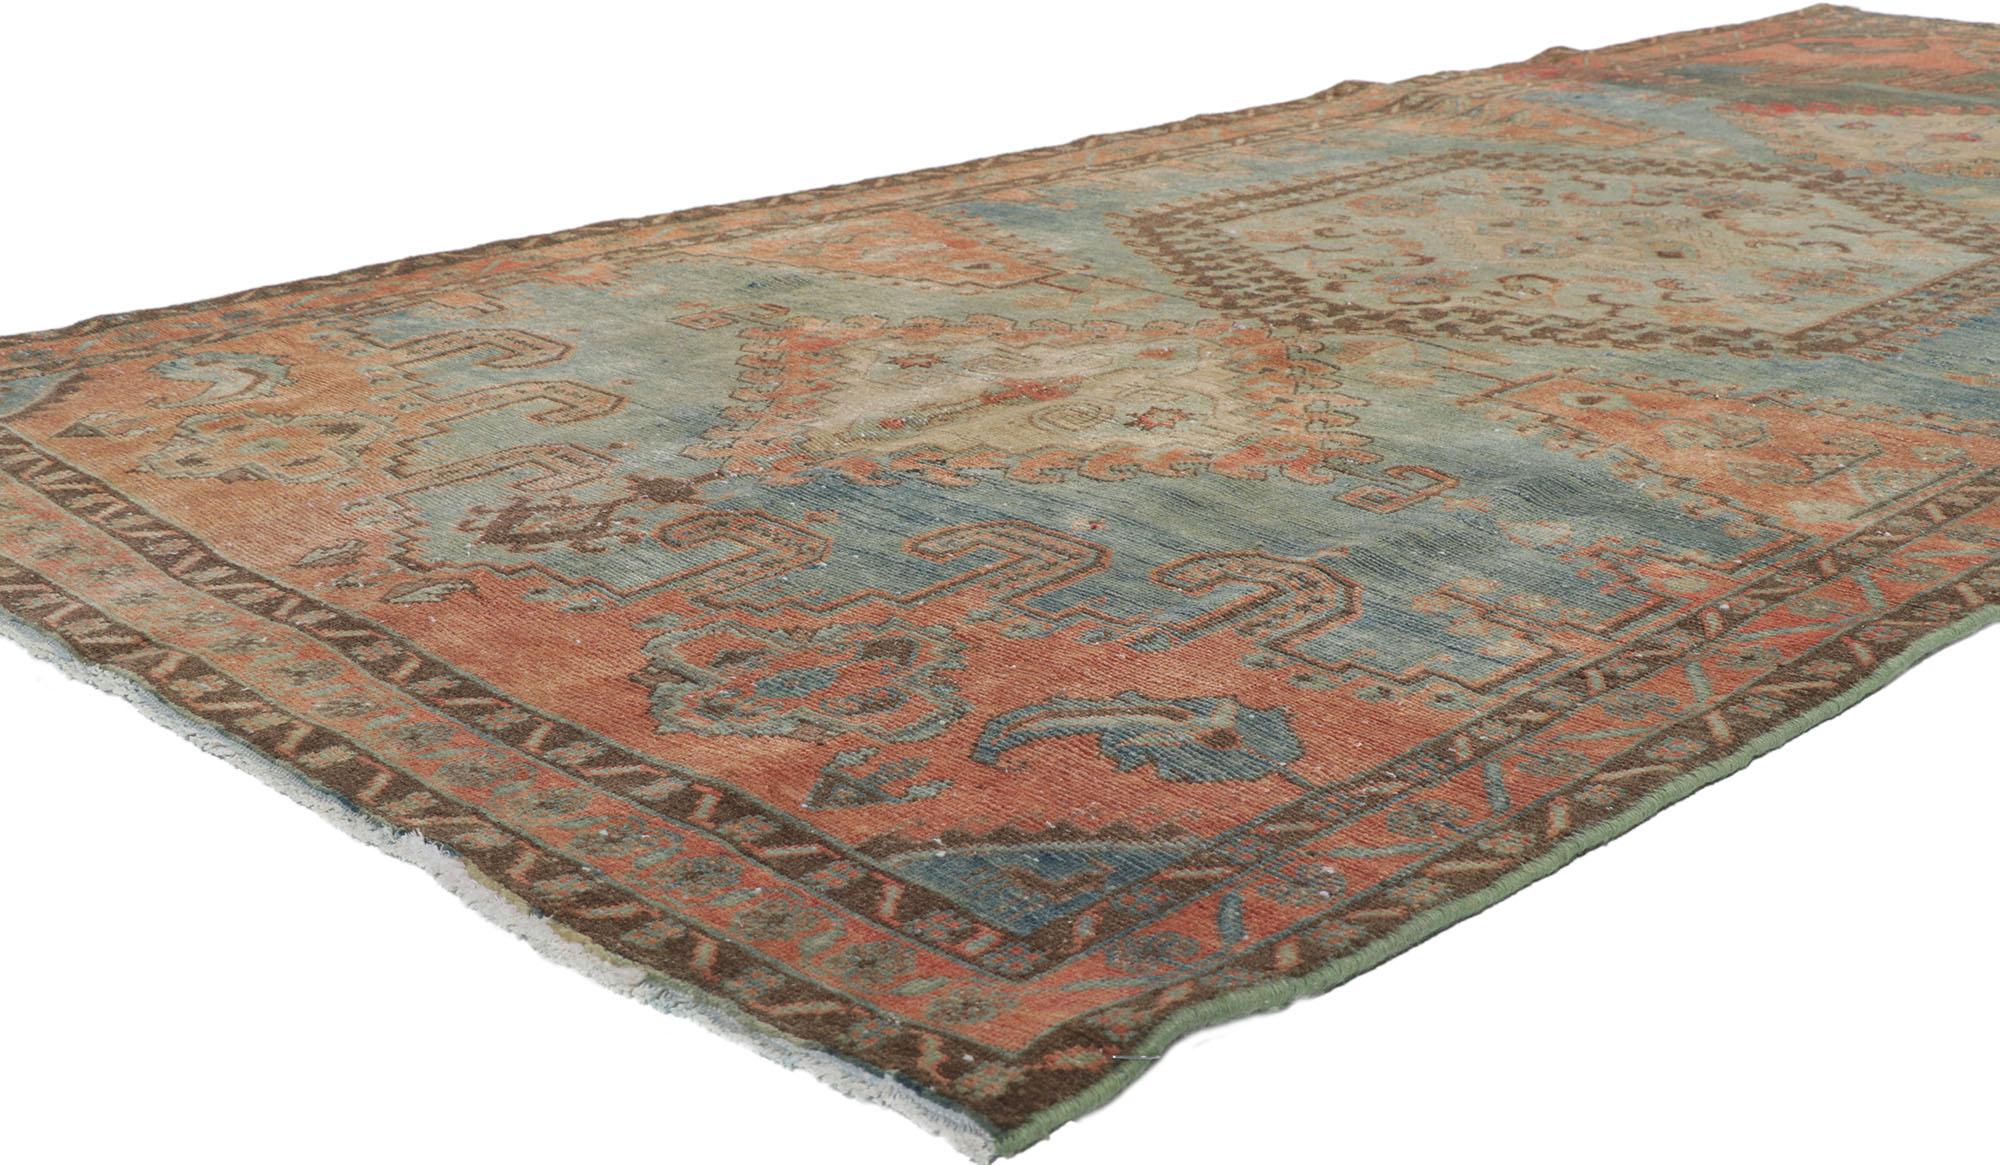 60978 Vintage-Worn Persian Viss Rug, 05'02 x 11'03.
Introducing a captivating fusion of tribal enchantment and rustic finesse, behold the beguiling hand-knotted wool vintage Persian Viss rug. This remarkable piece takes center stage on a mesmerizing